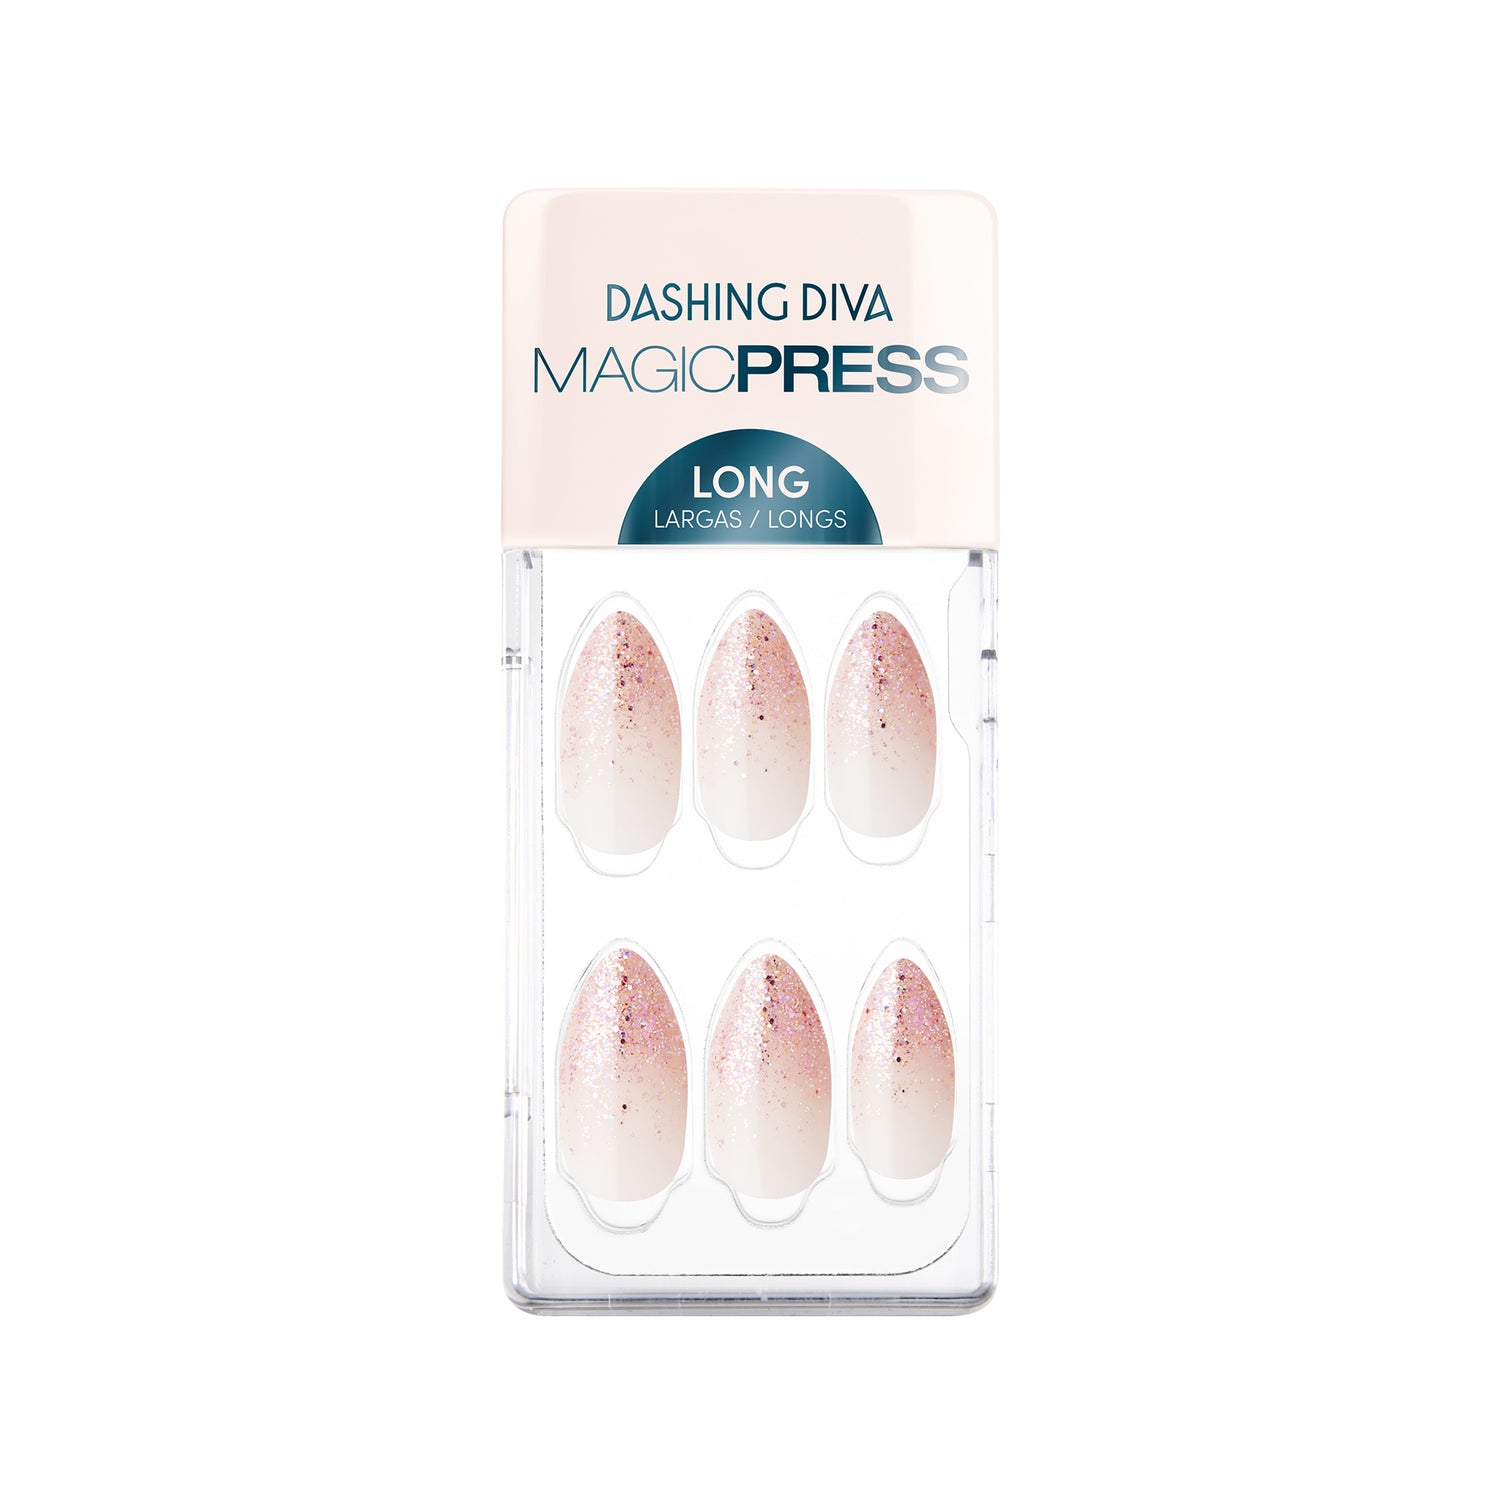 Short length, stiletto shape, glossy finish glittery ombre pink french tip press-on gel nails with a nude base.